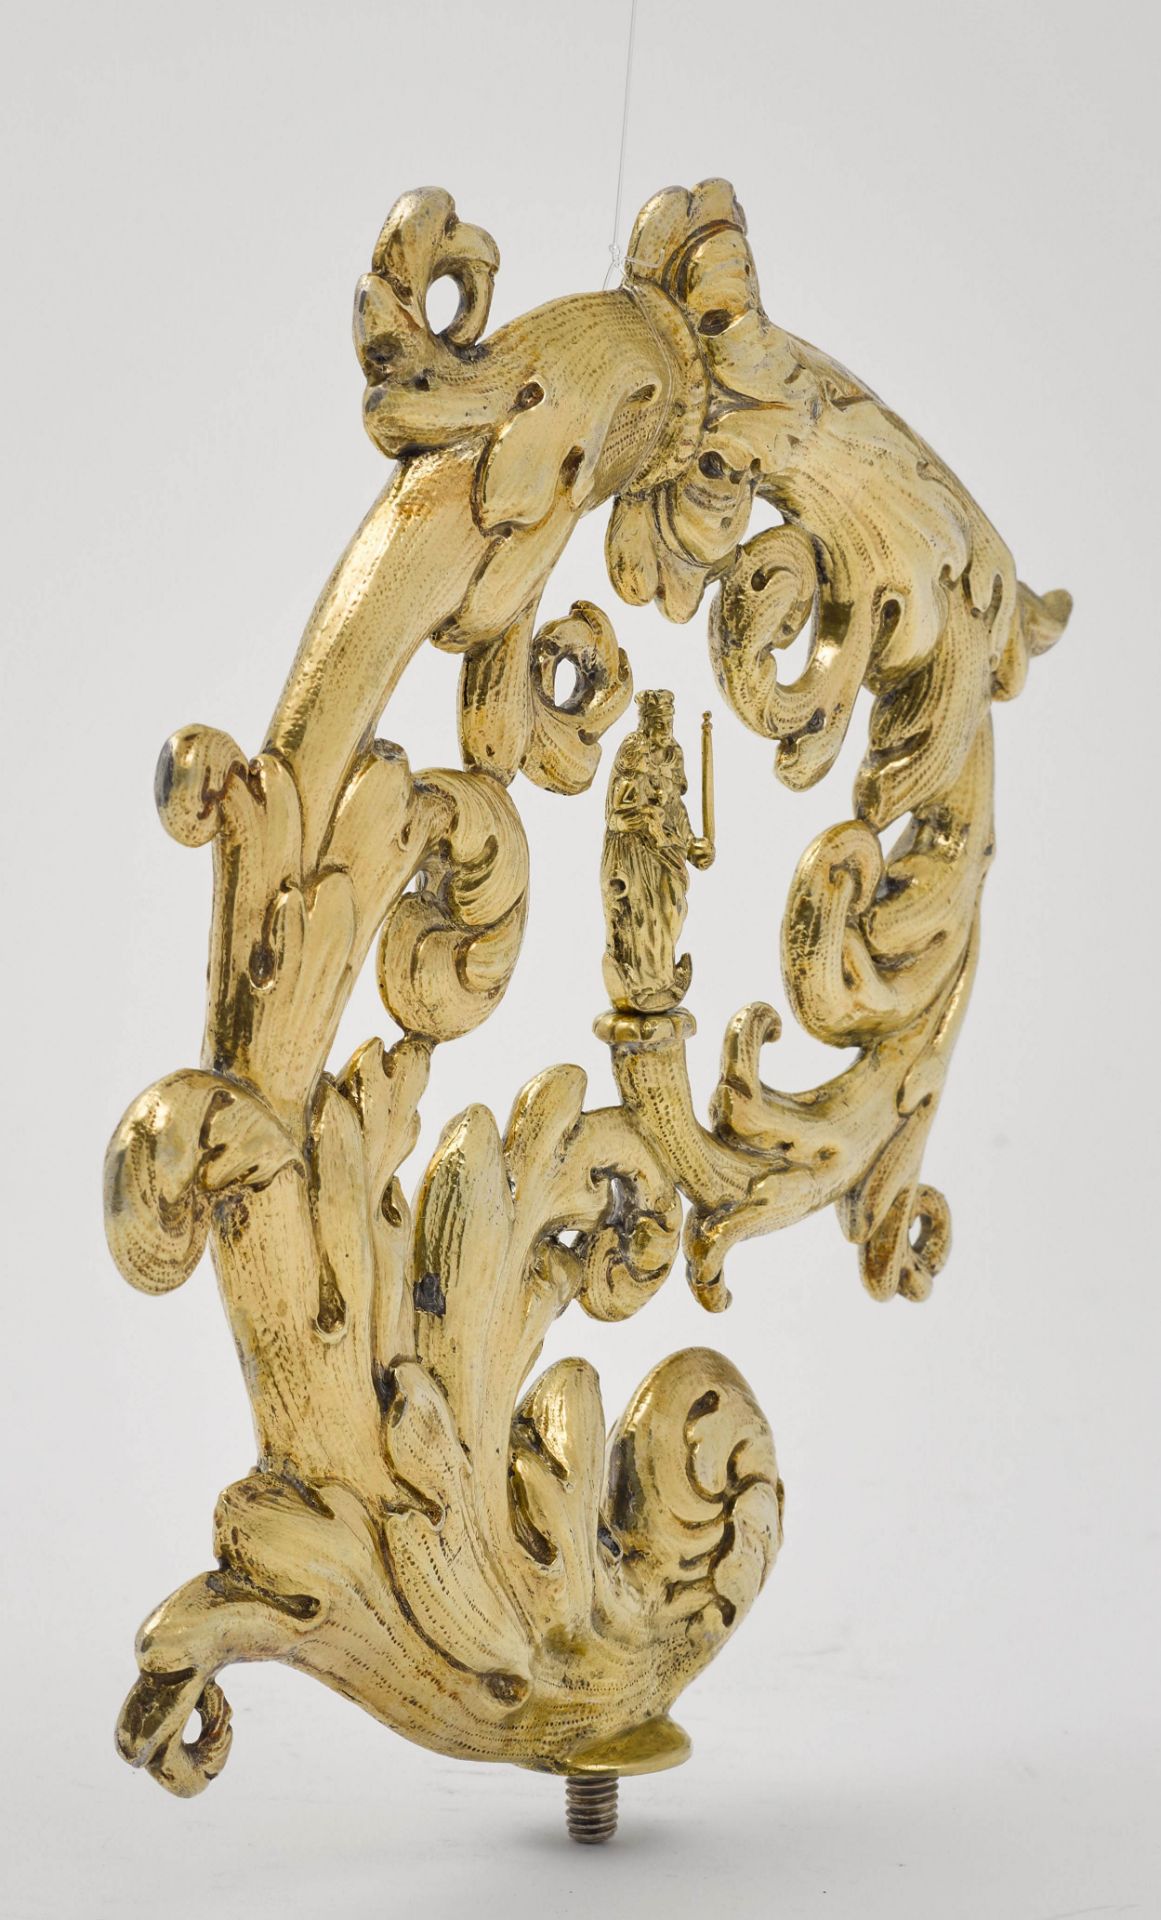 A SILVER-GILT CROZIER HEAD - Image 3 of 3